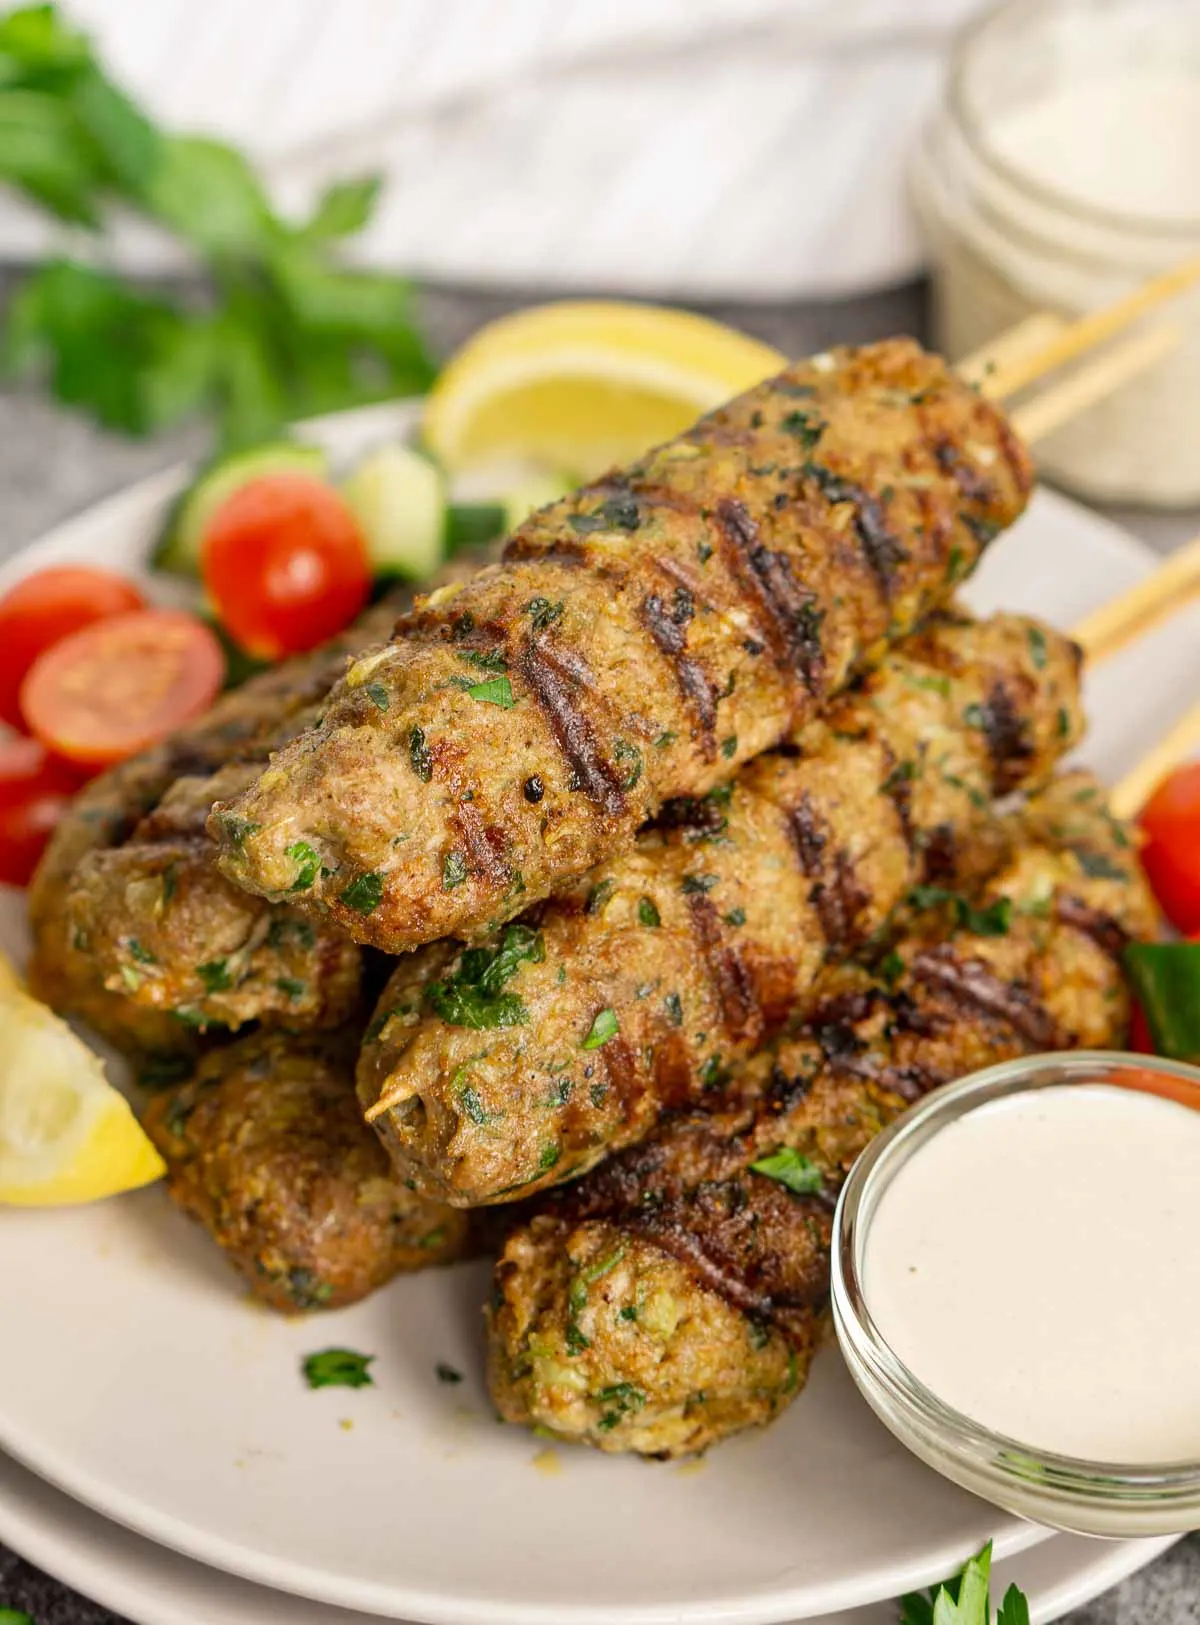 Plate of pork kofta skewers with dip and garnishes on the side.